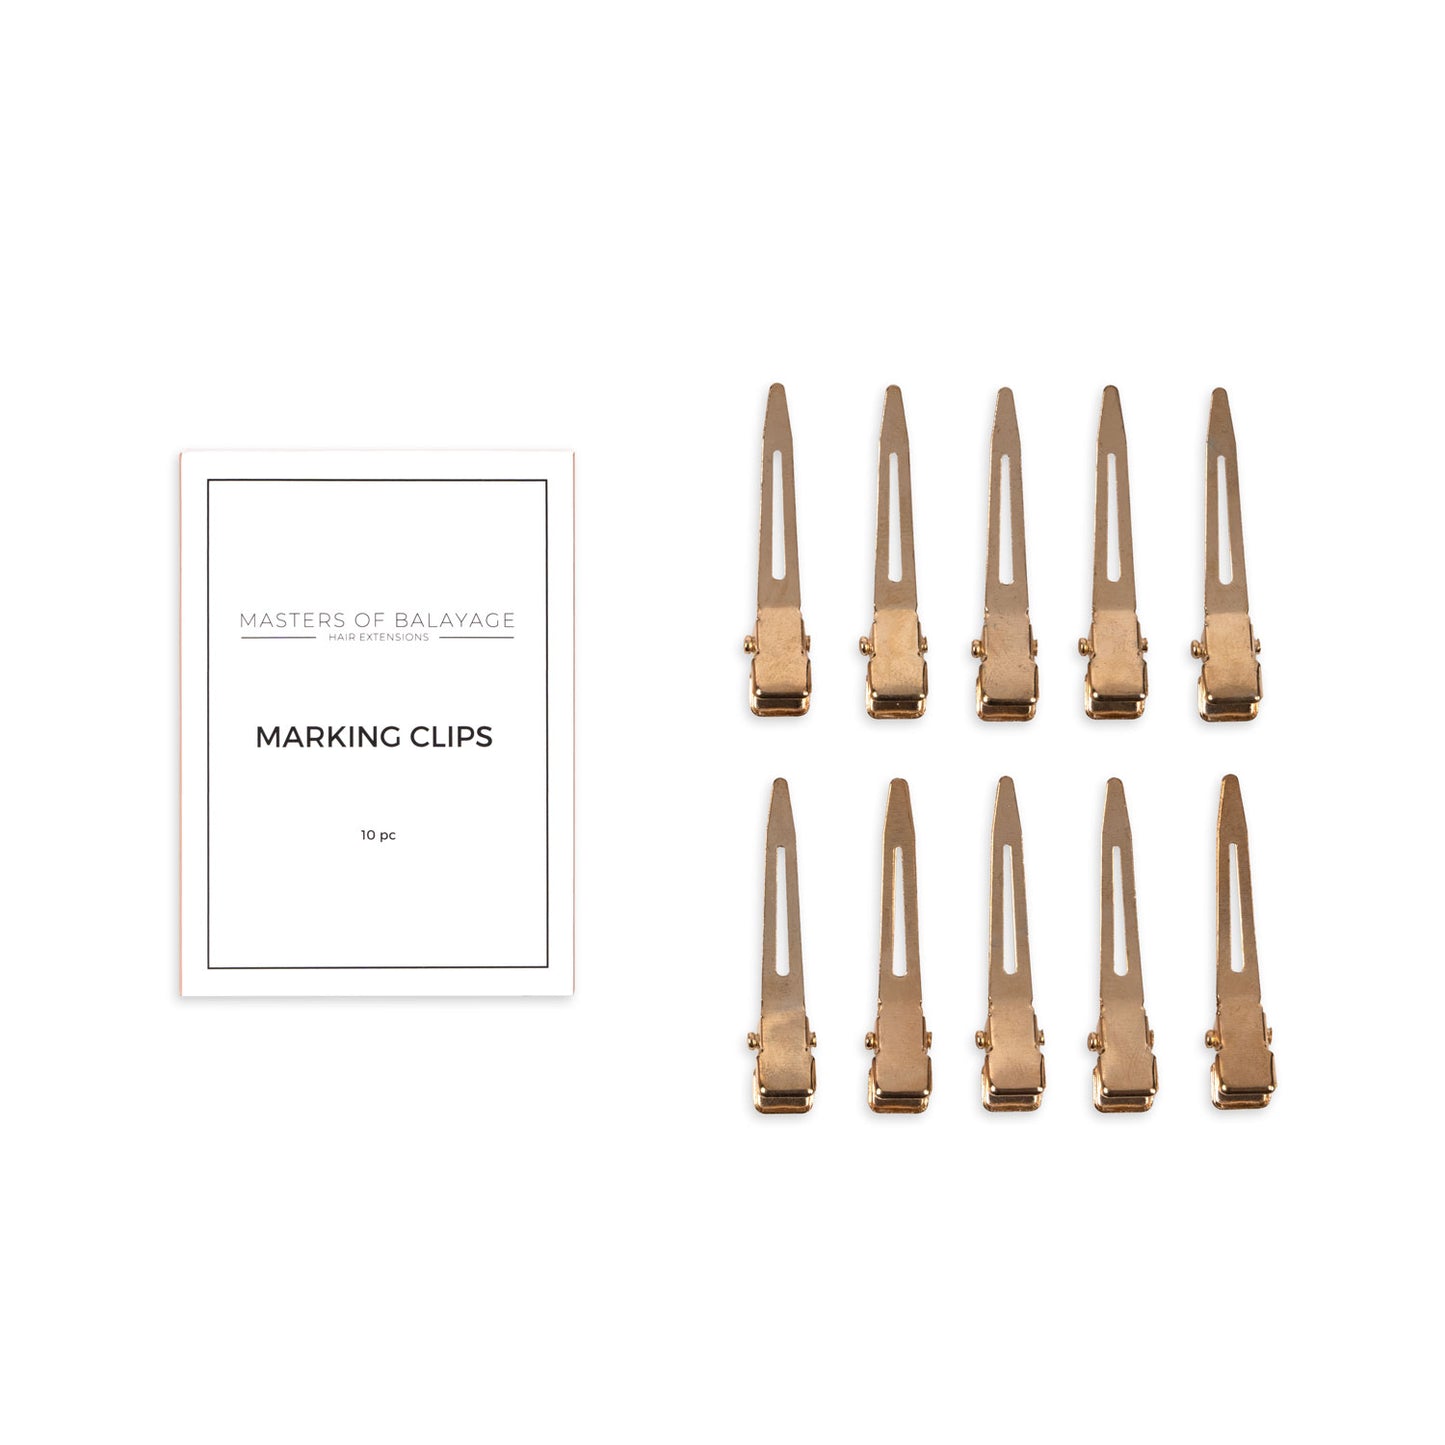 Gold Marking Clips - MSRP